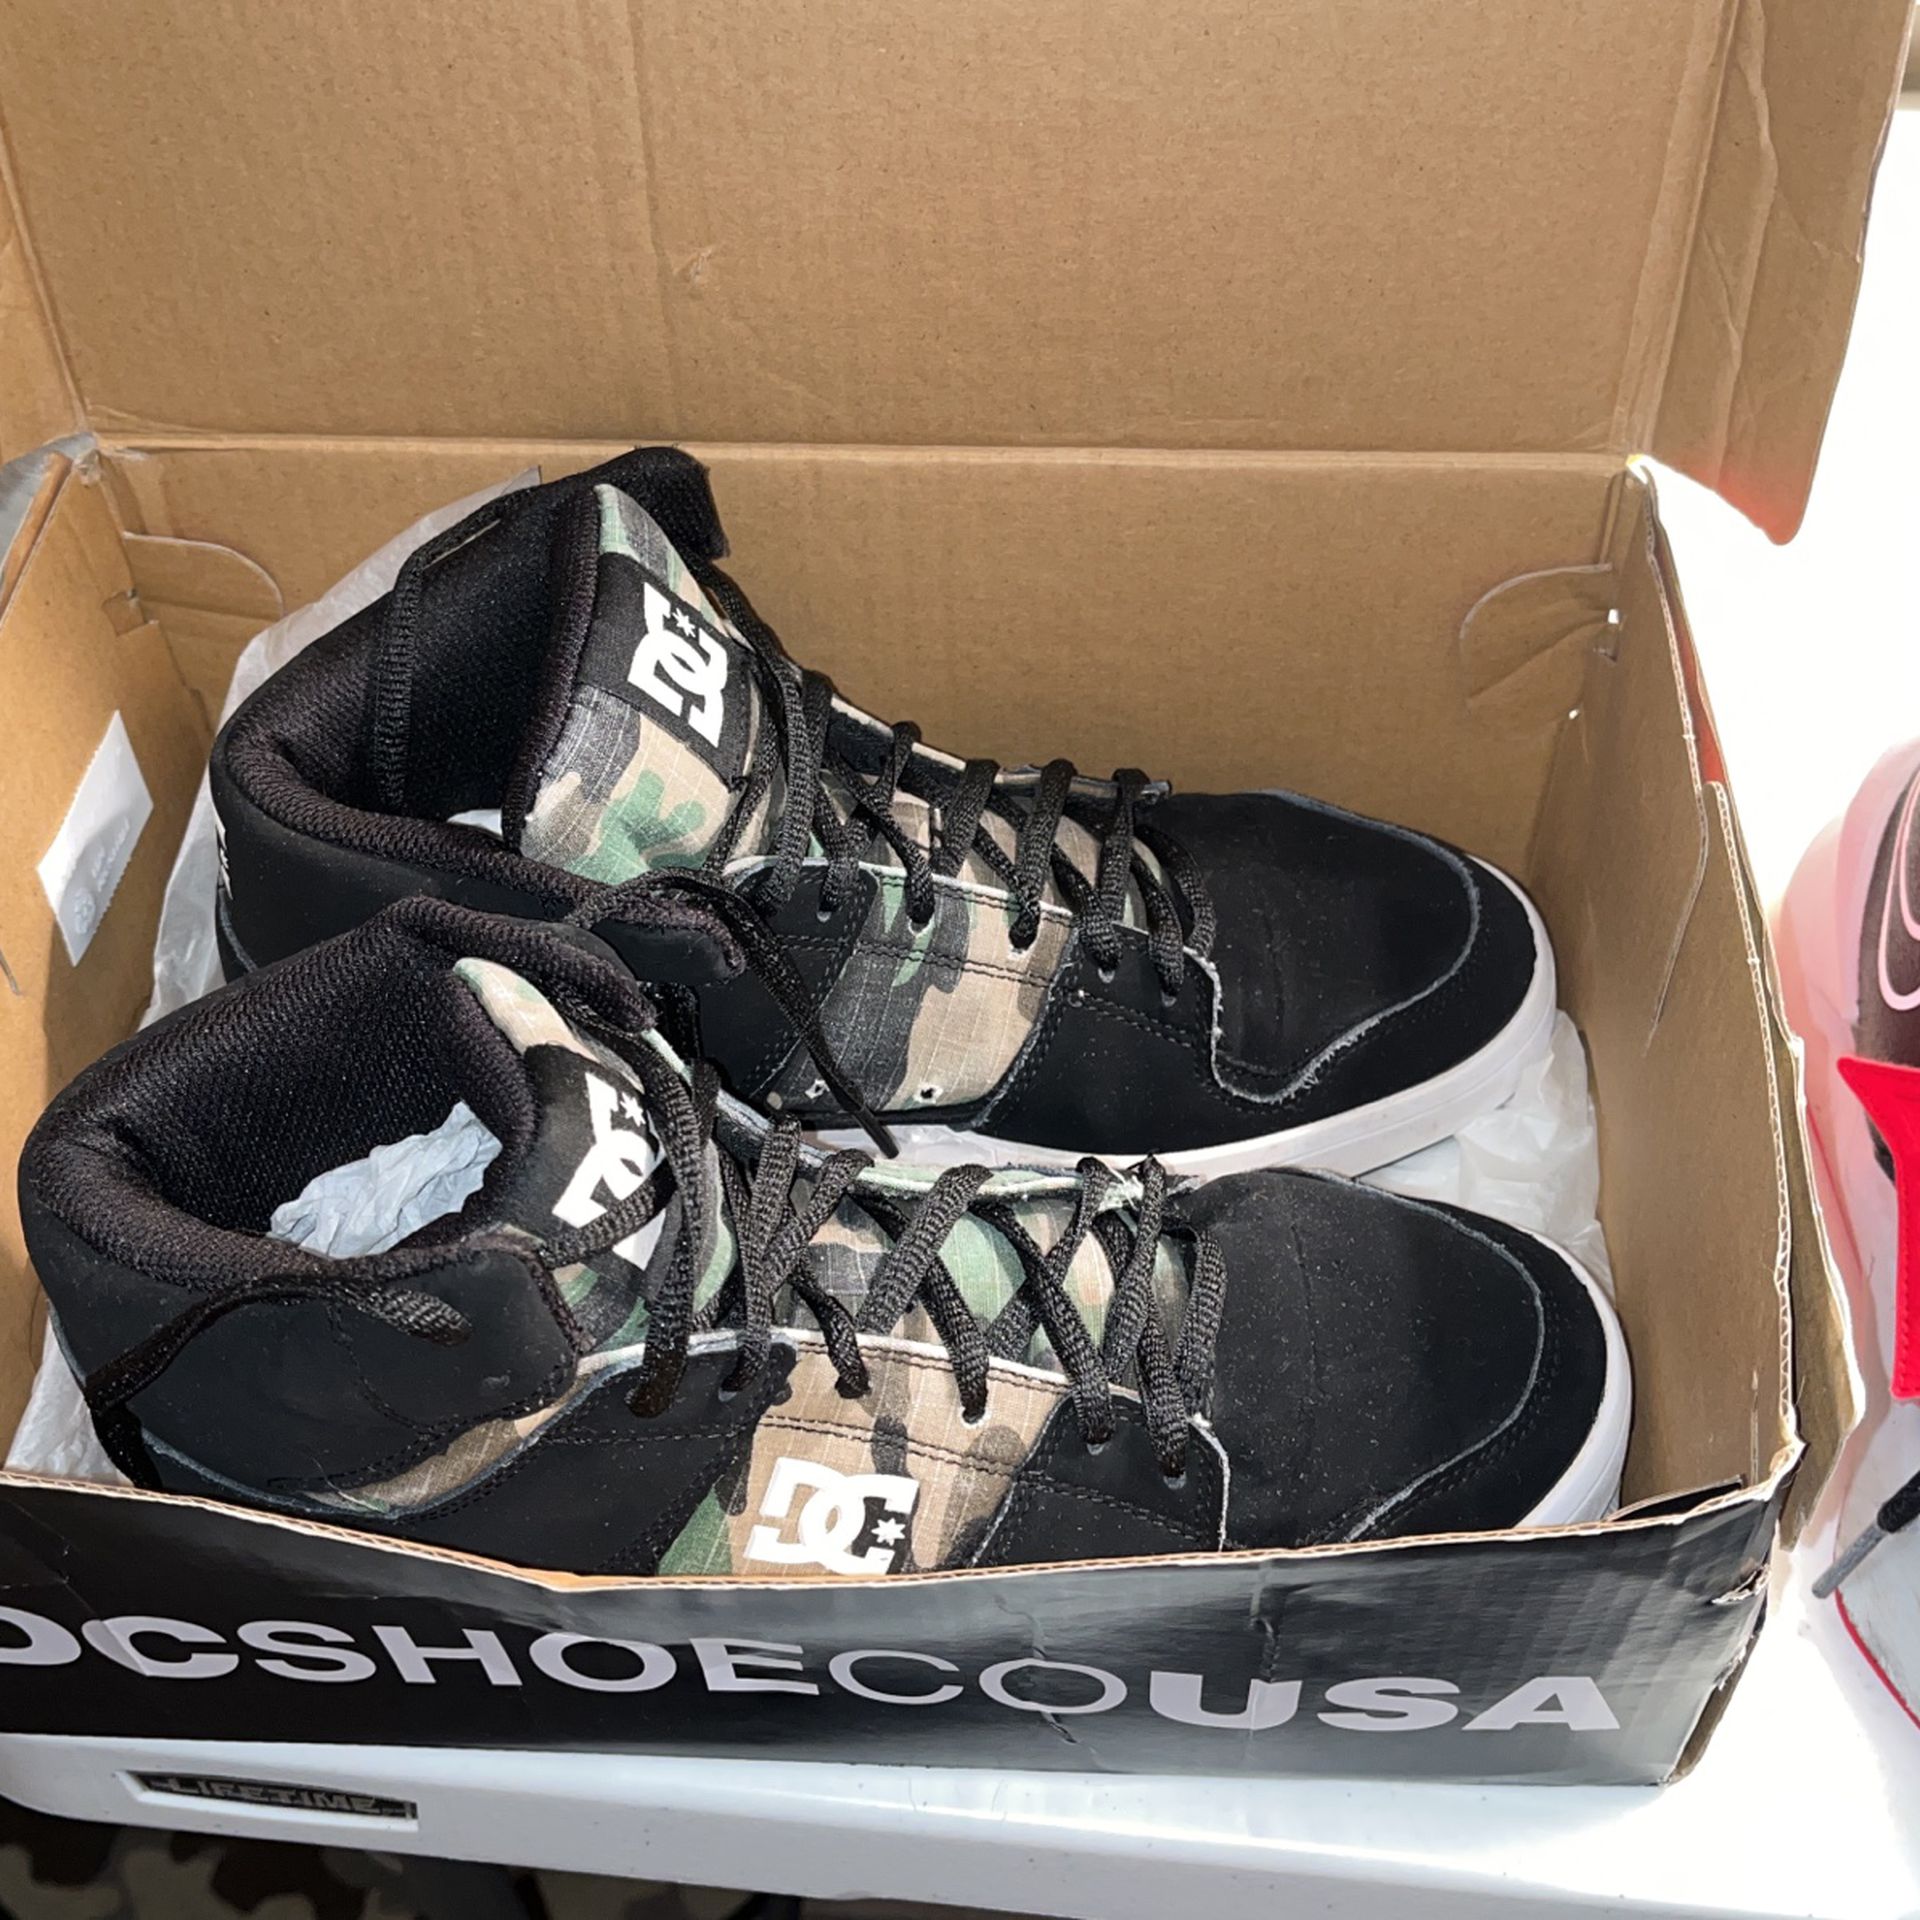 Dc Shoes Boys Size 8 for Sale in Largo, FL OfferUp